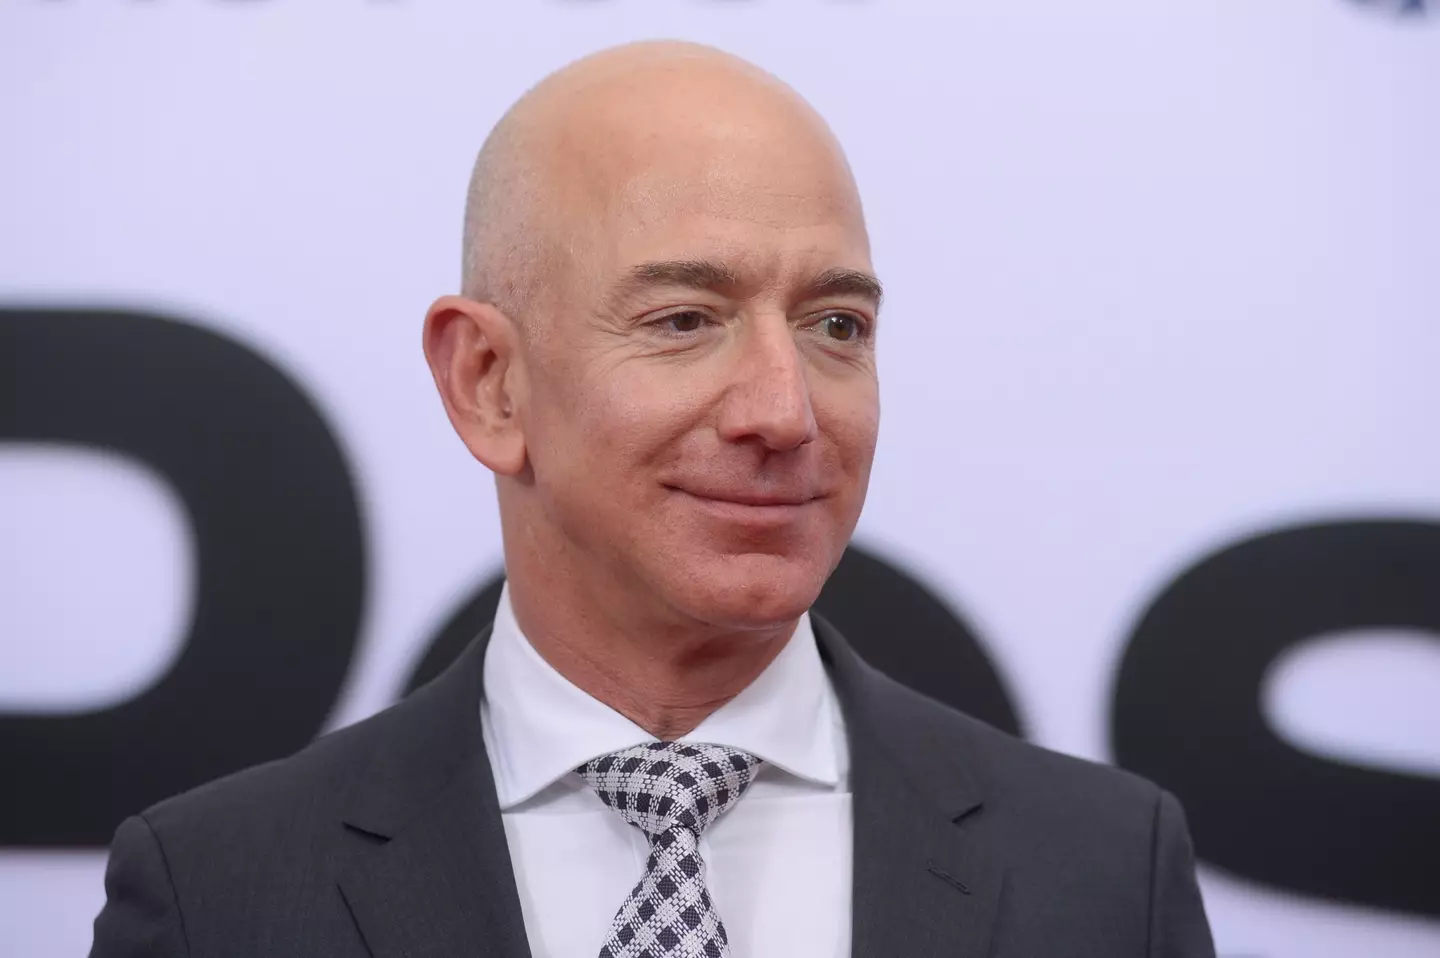 Bezos' first interview question was tricky, to say the least.